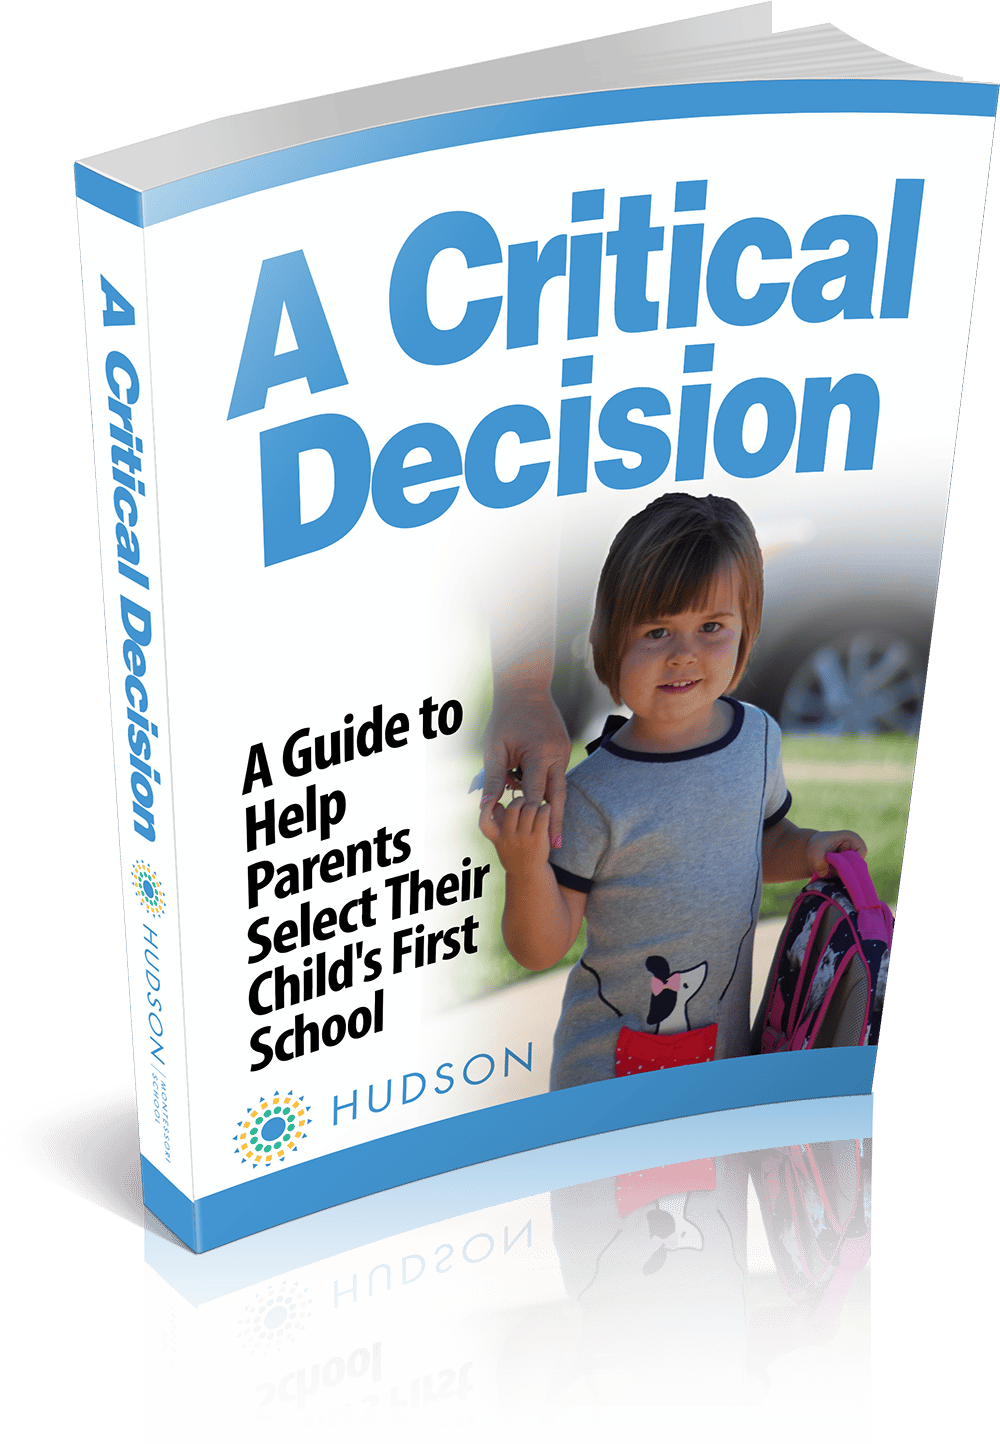 A CRITICAL DECISION: A Guide to Help Parents Select Their Child's First School